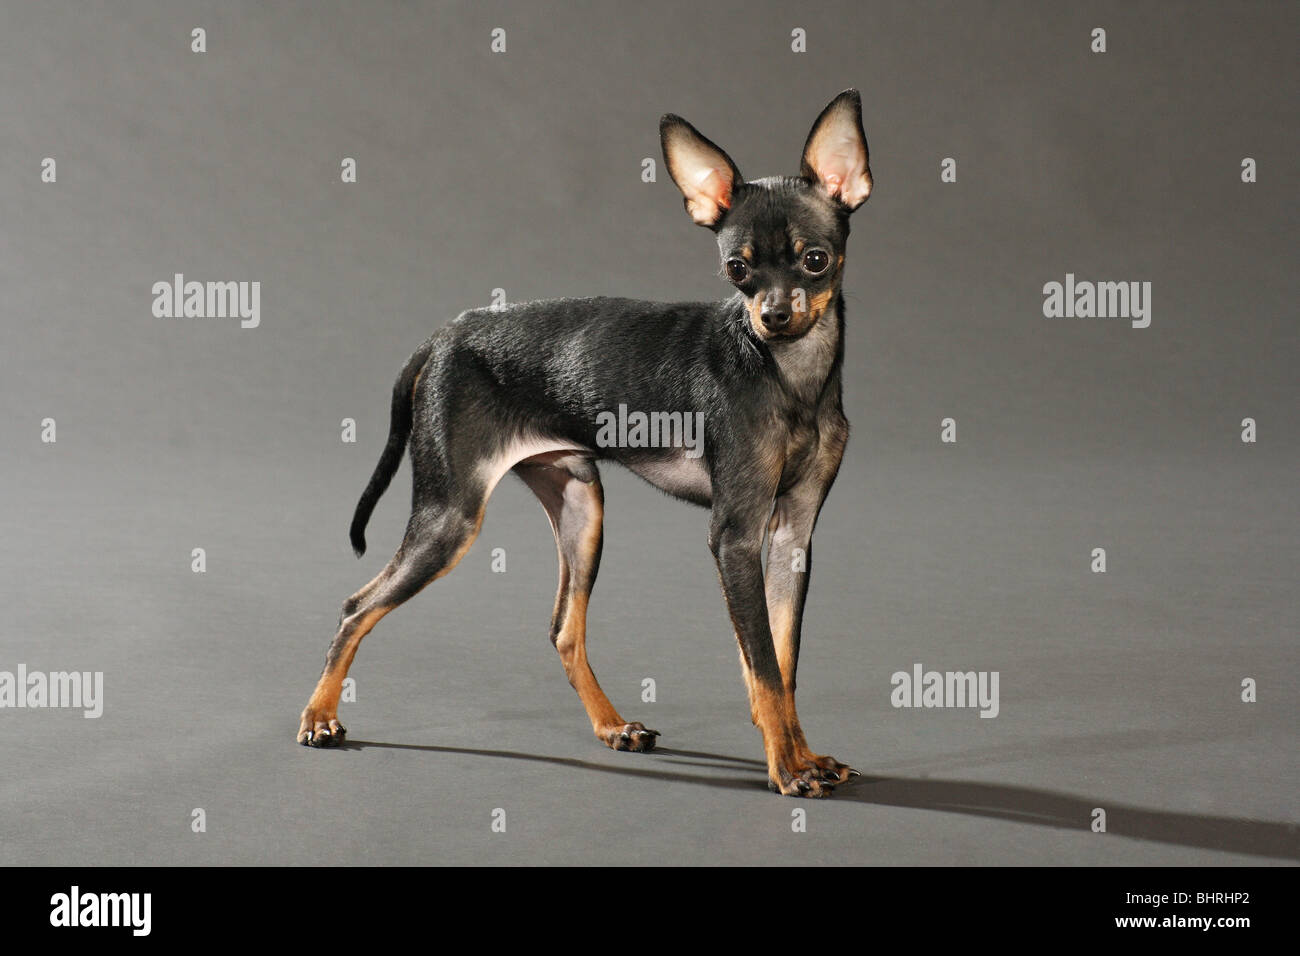 Russian Toy Terrier dog - standing - cut out Stock Photo